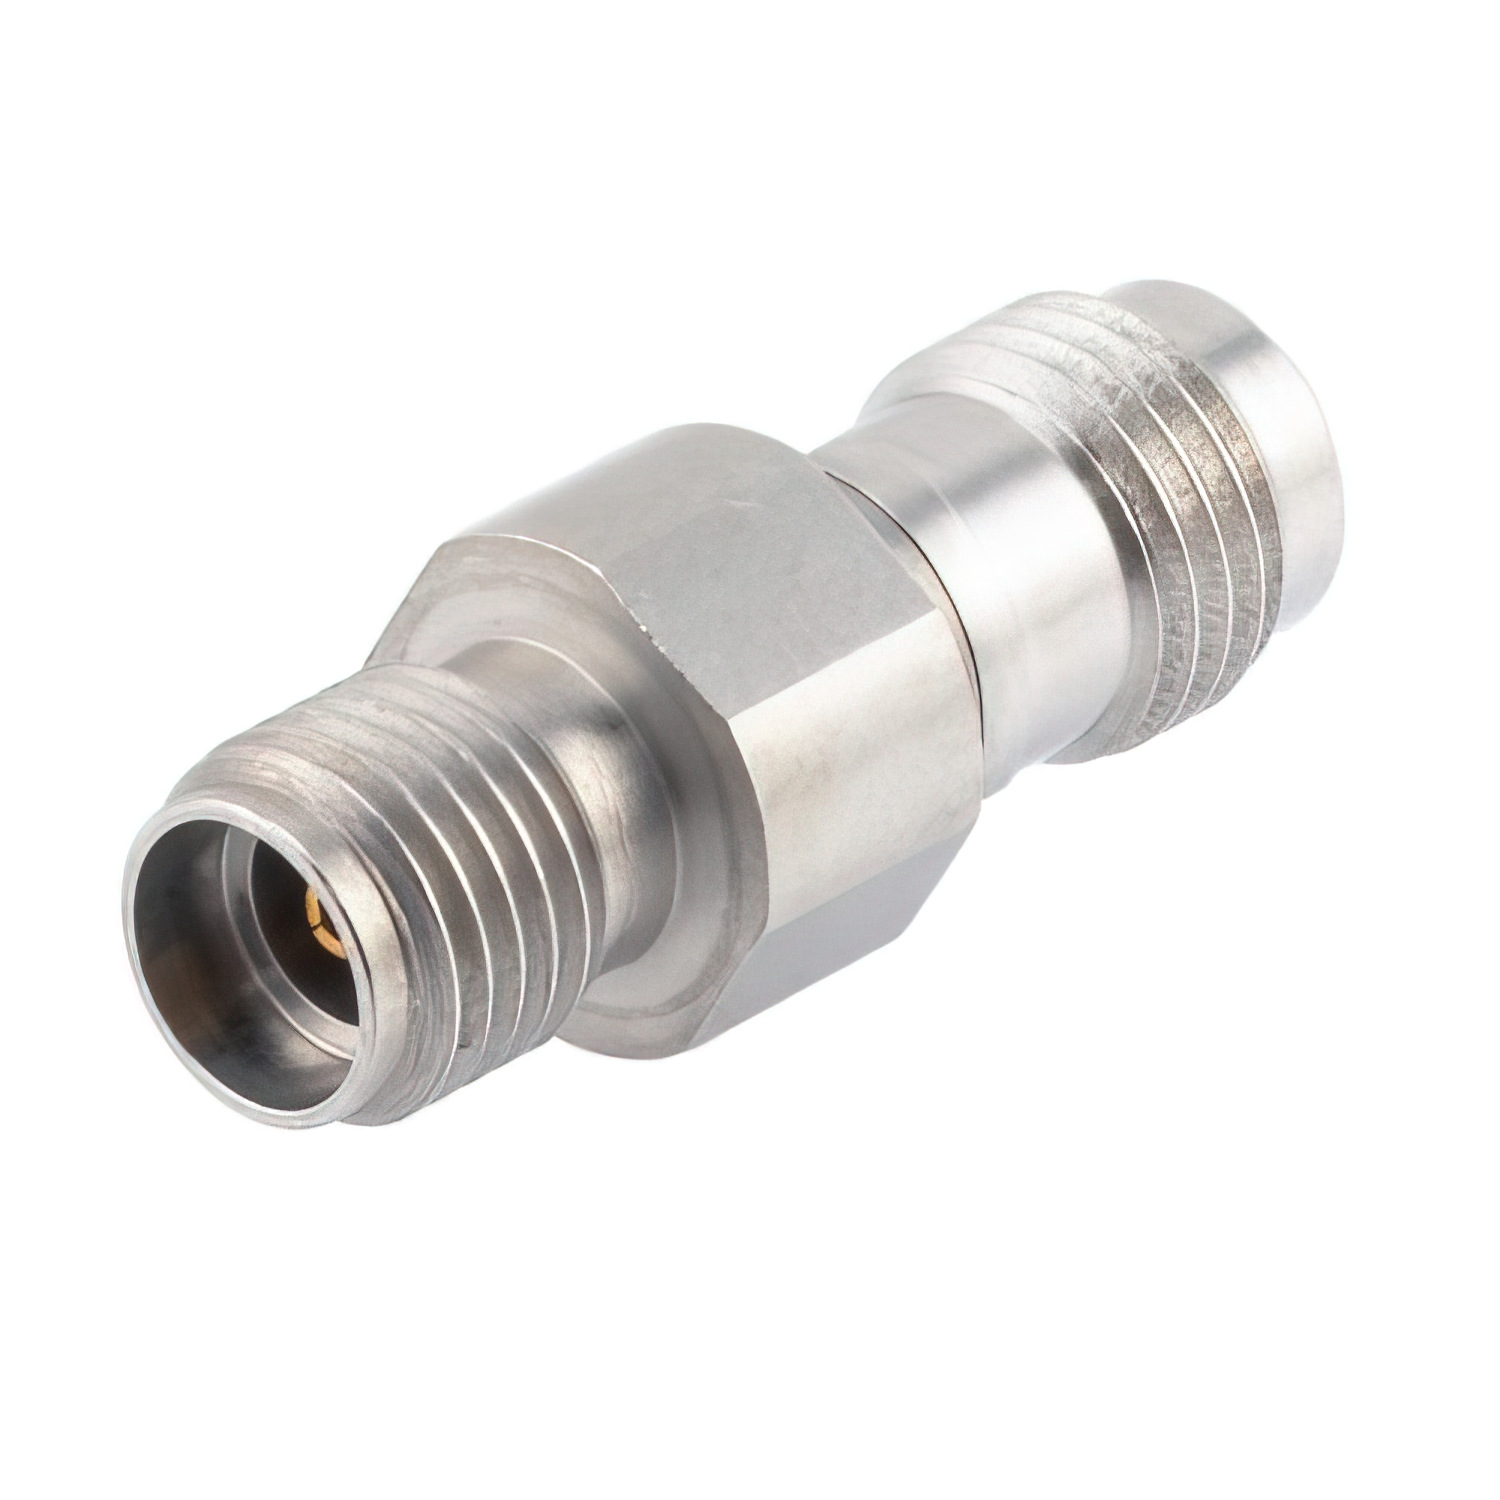 3.5mm Female to 2.4mm Female Adapter1